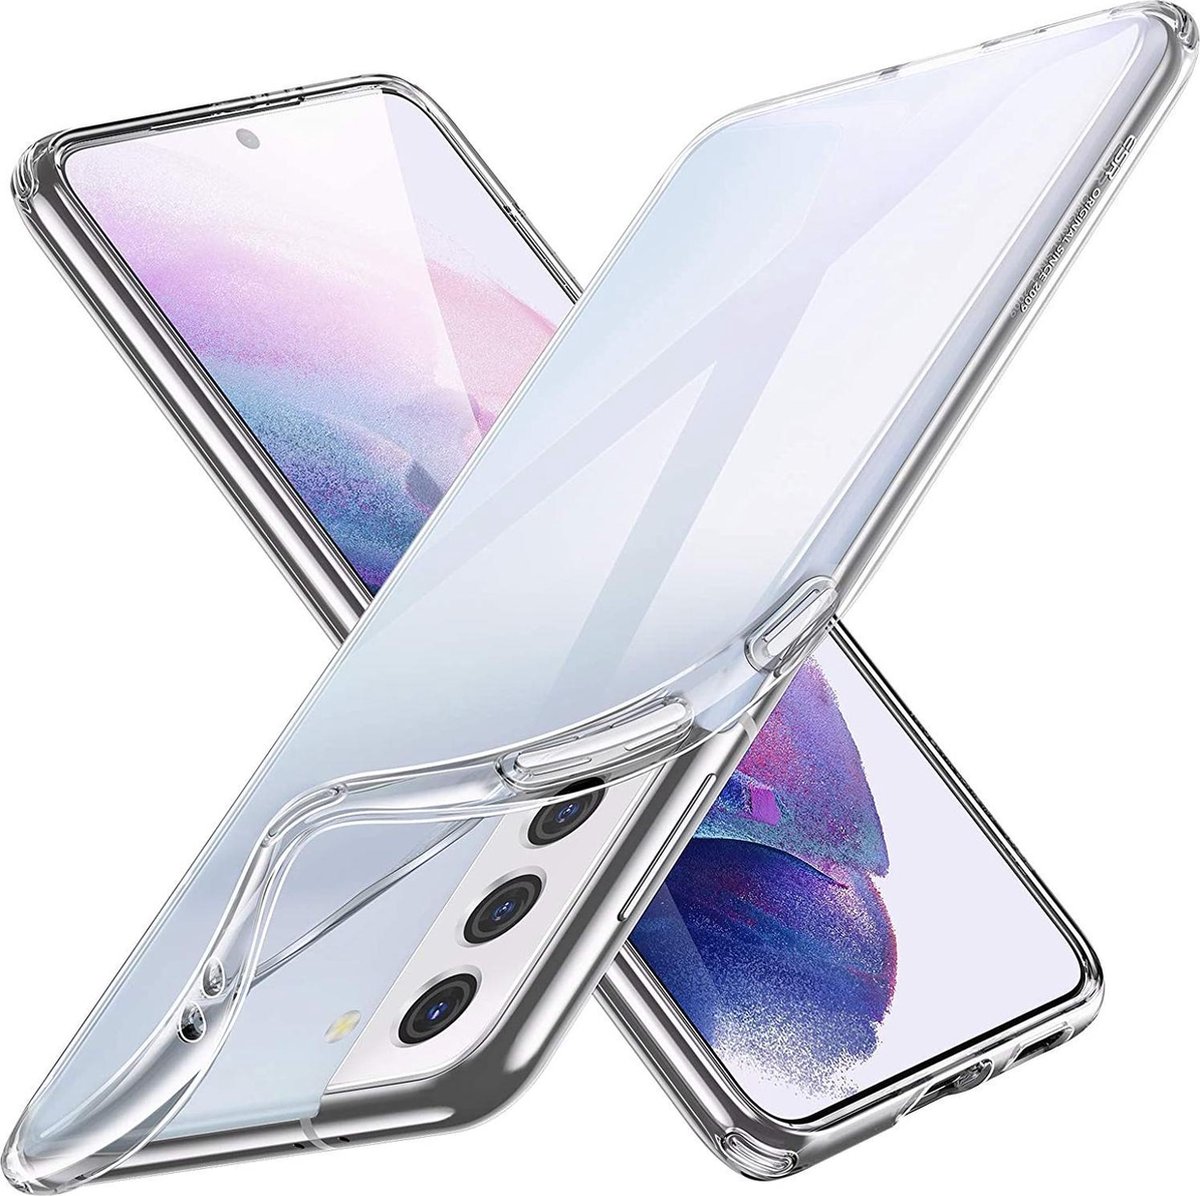 HoesjeGeschikt voor: Samsung Galaxy M31s - Silicone - Transparant